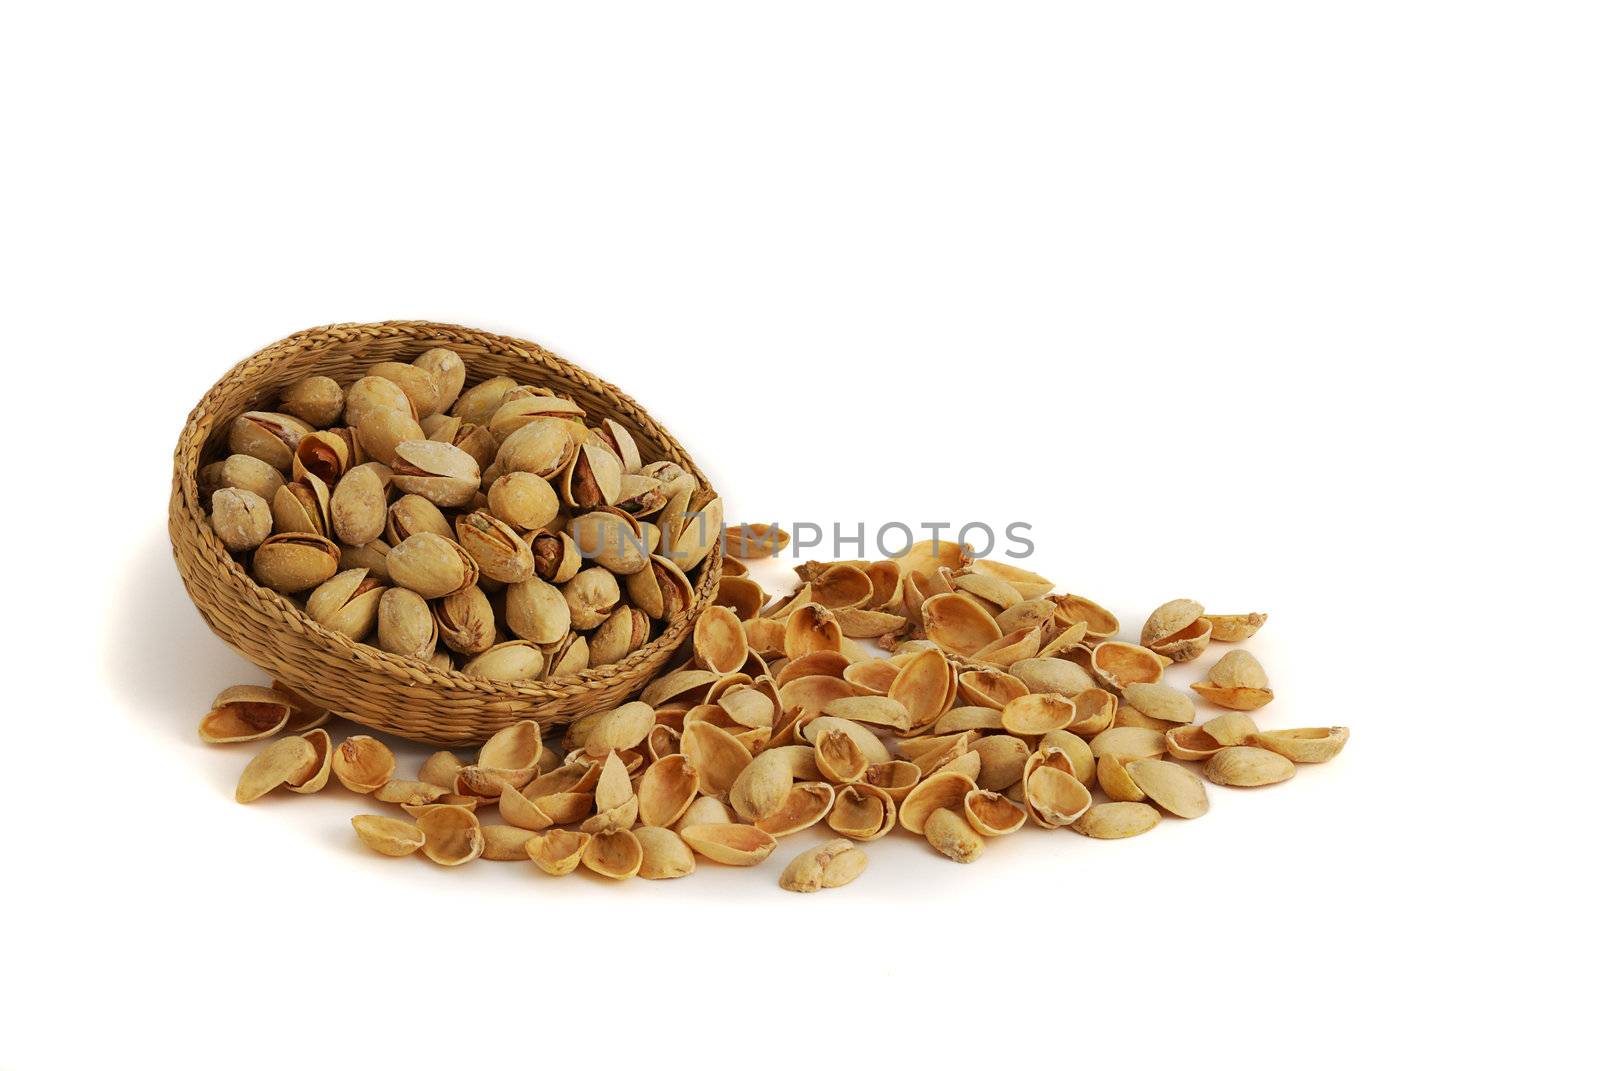 Pistachios in interwoven bowl with spilled nutshells on white background